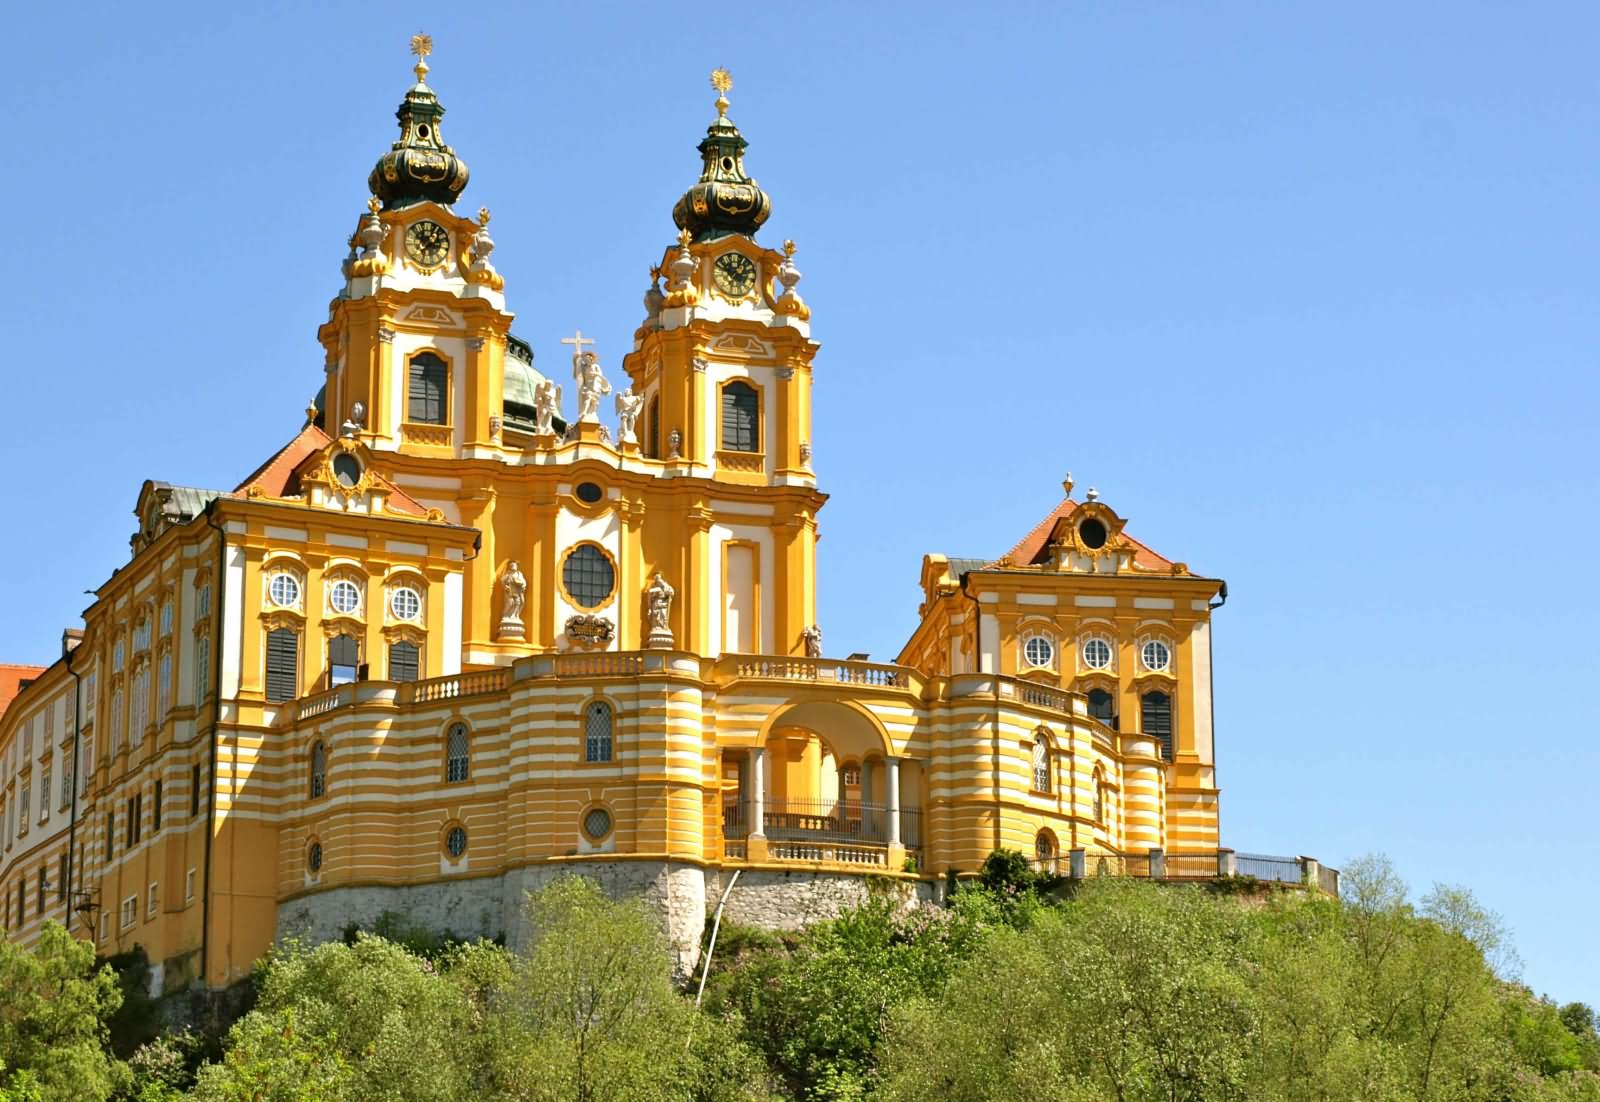 Beautiful Picture Of The Melk Abbey In Austria